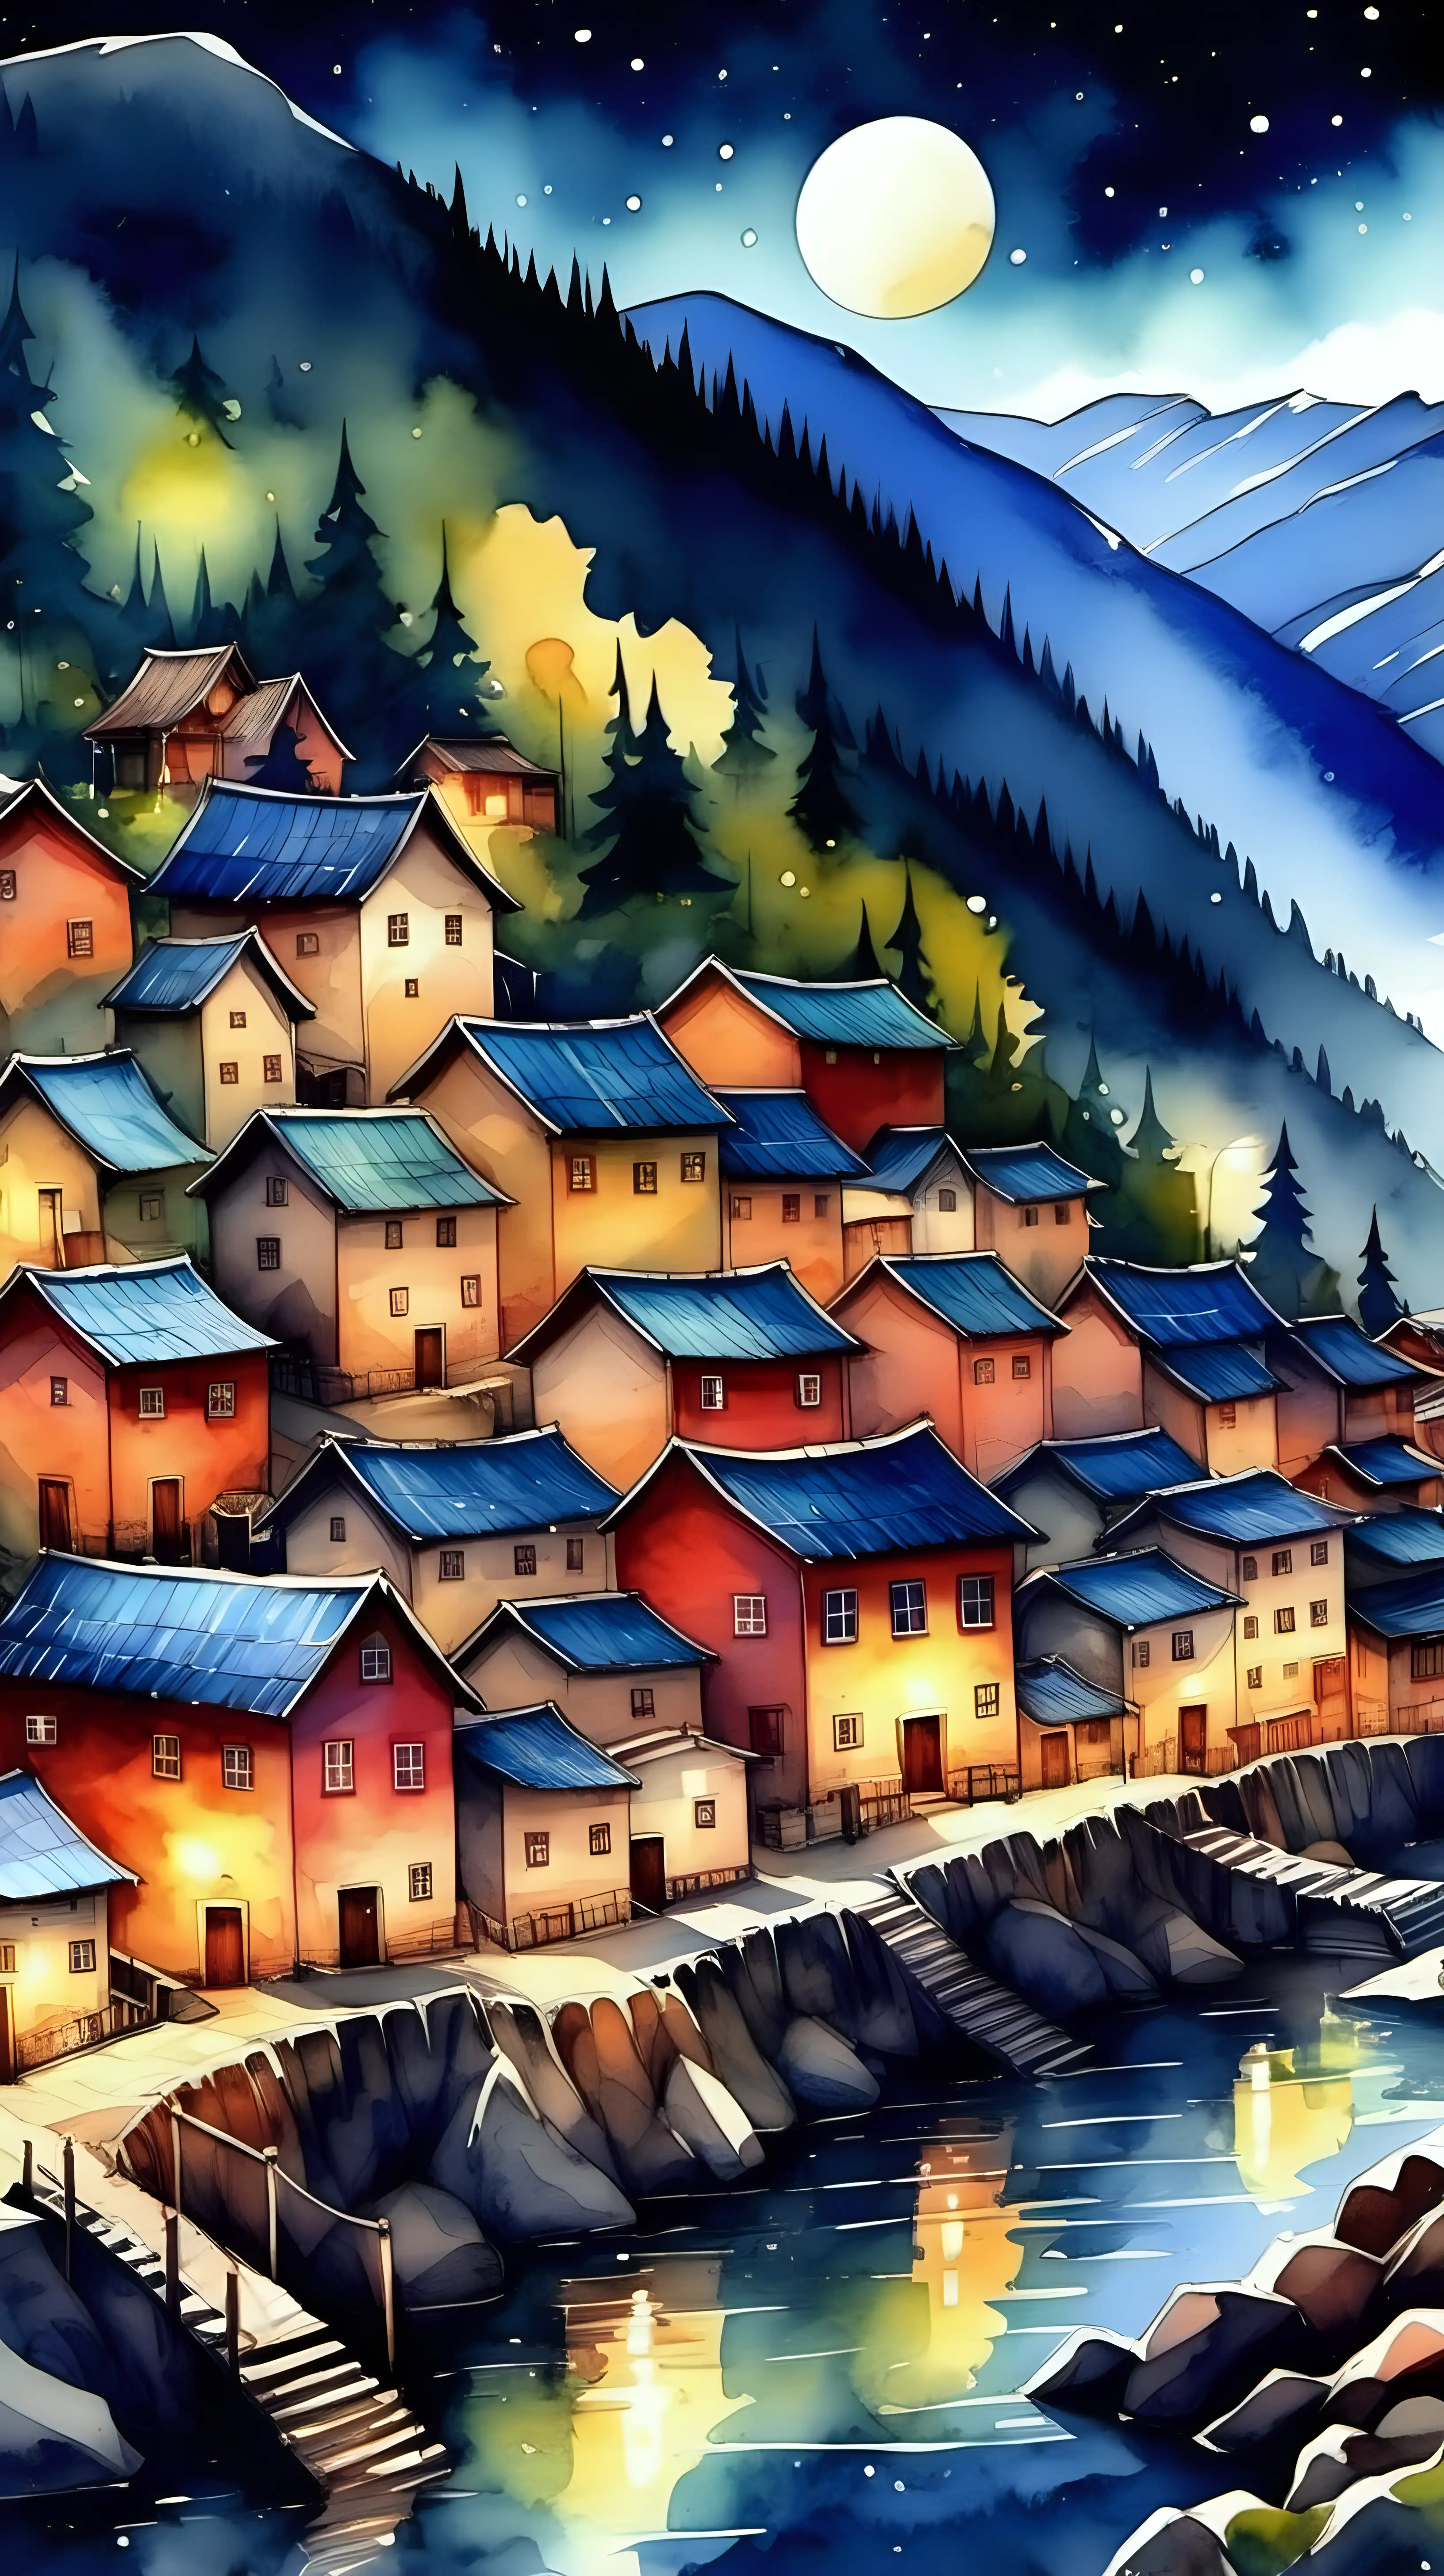 very detailed image of a village, beautiful village in the mountains, use watercolor style, bright vibrant colors, nigh time